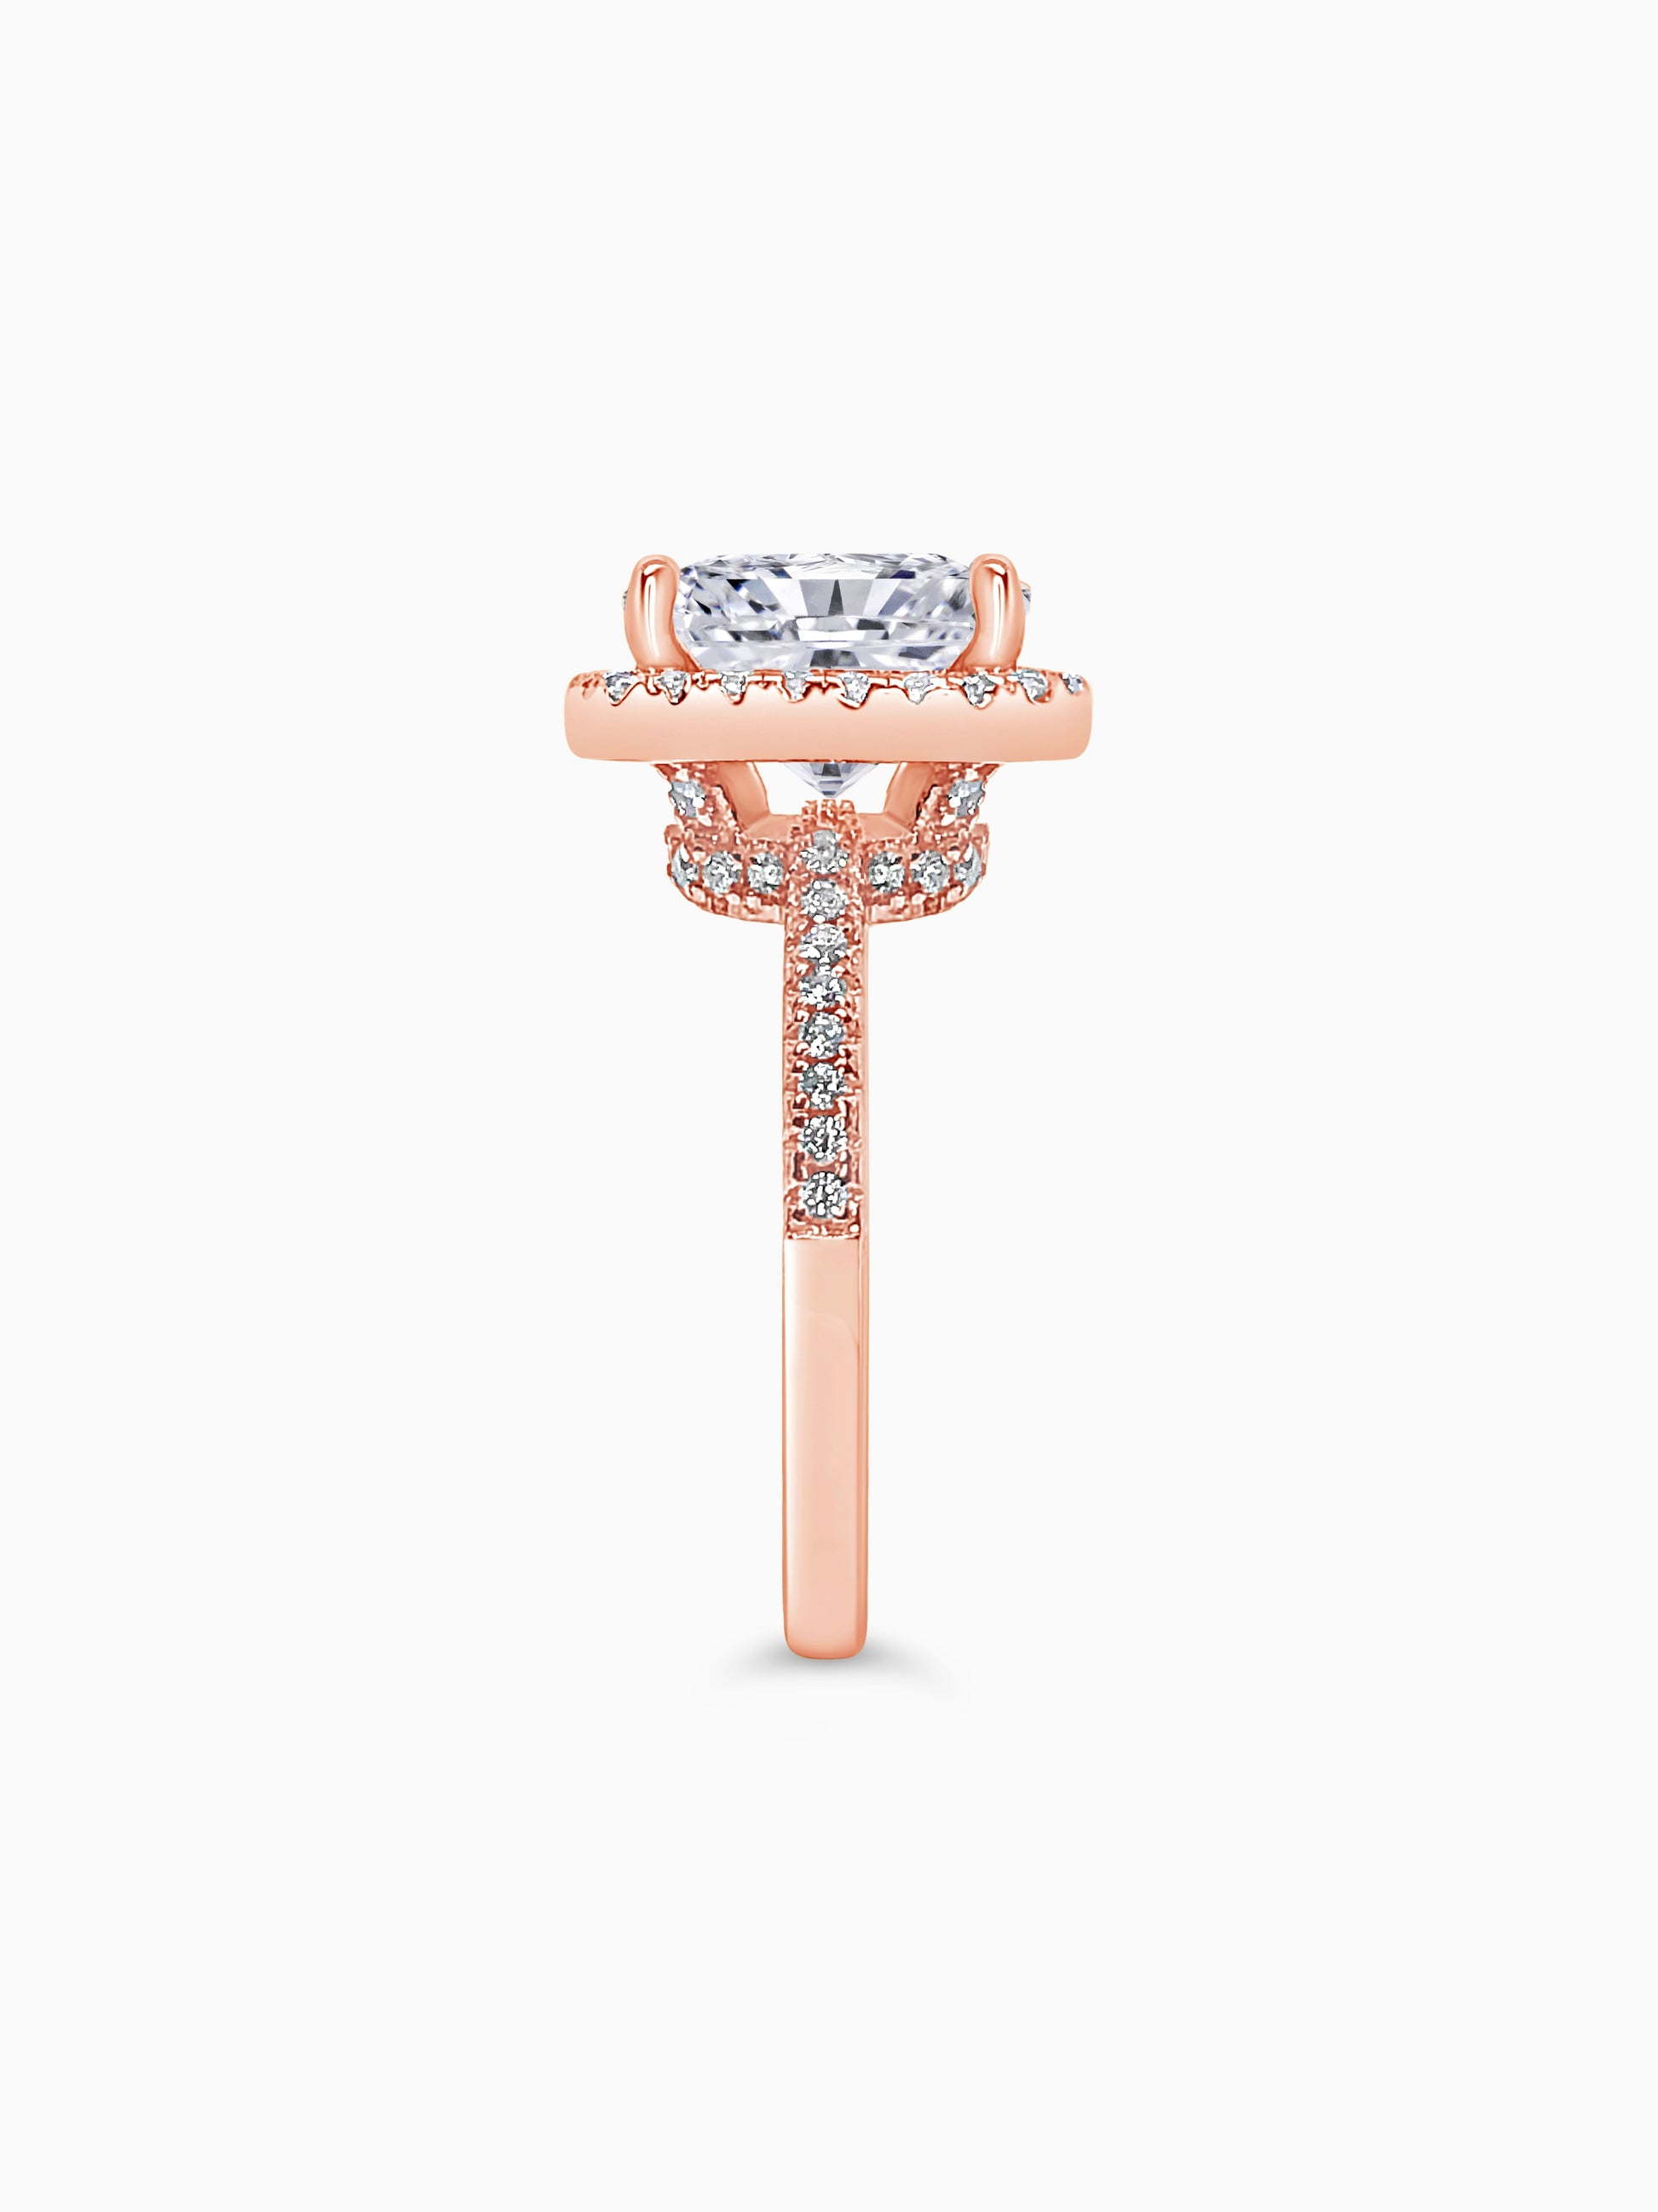 Rose Gold Large Cushion Cut with Surrounding Halo and Pavé stones all along the prongs, crown, and band - Other Side View